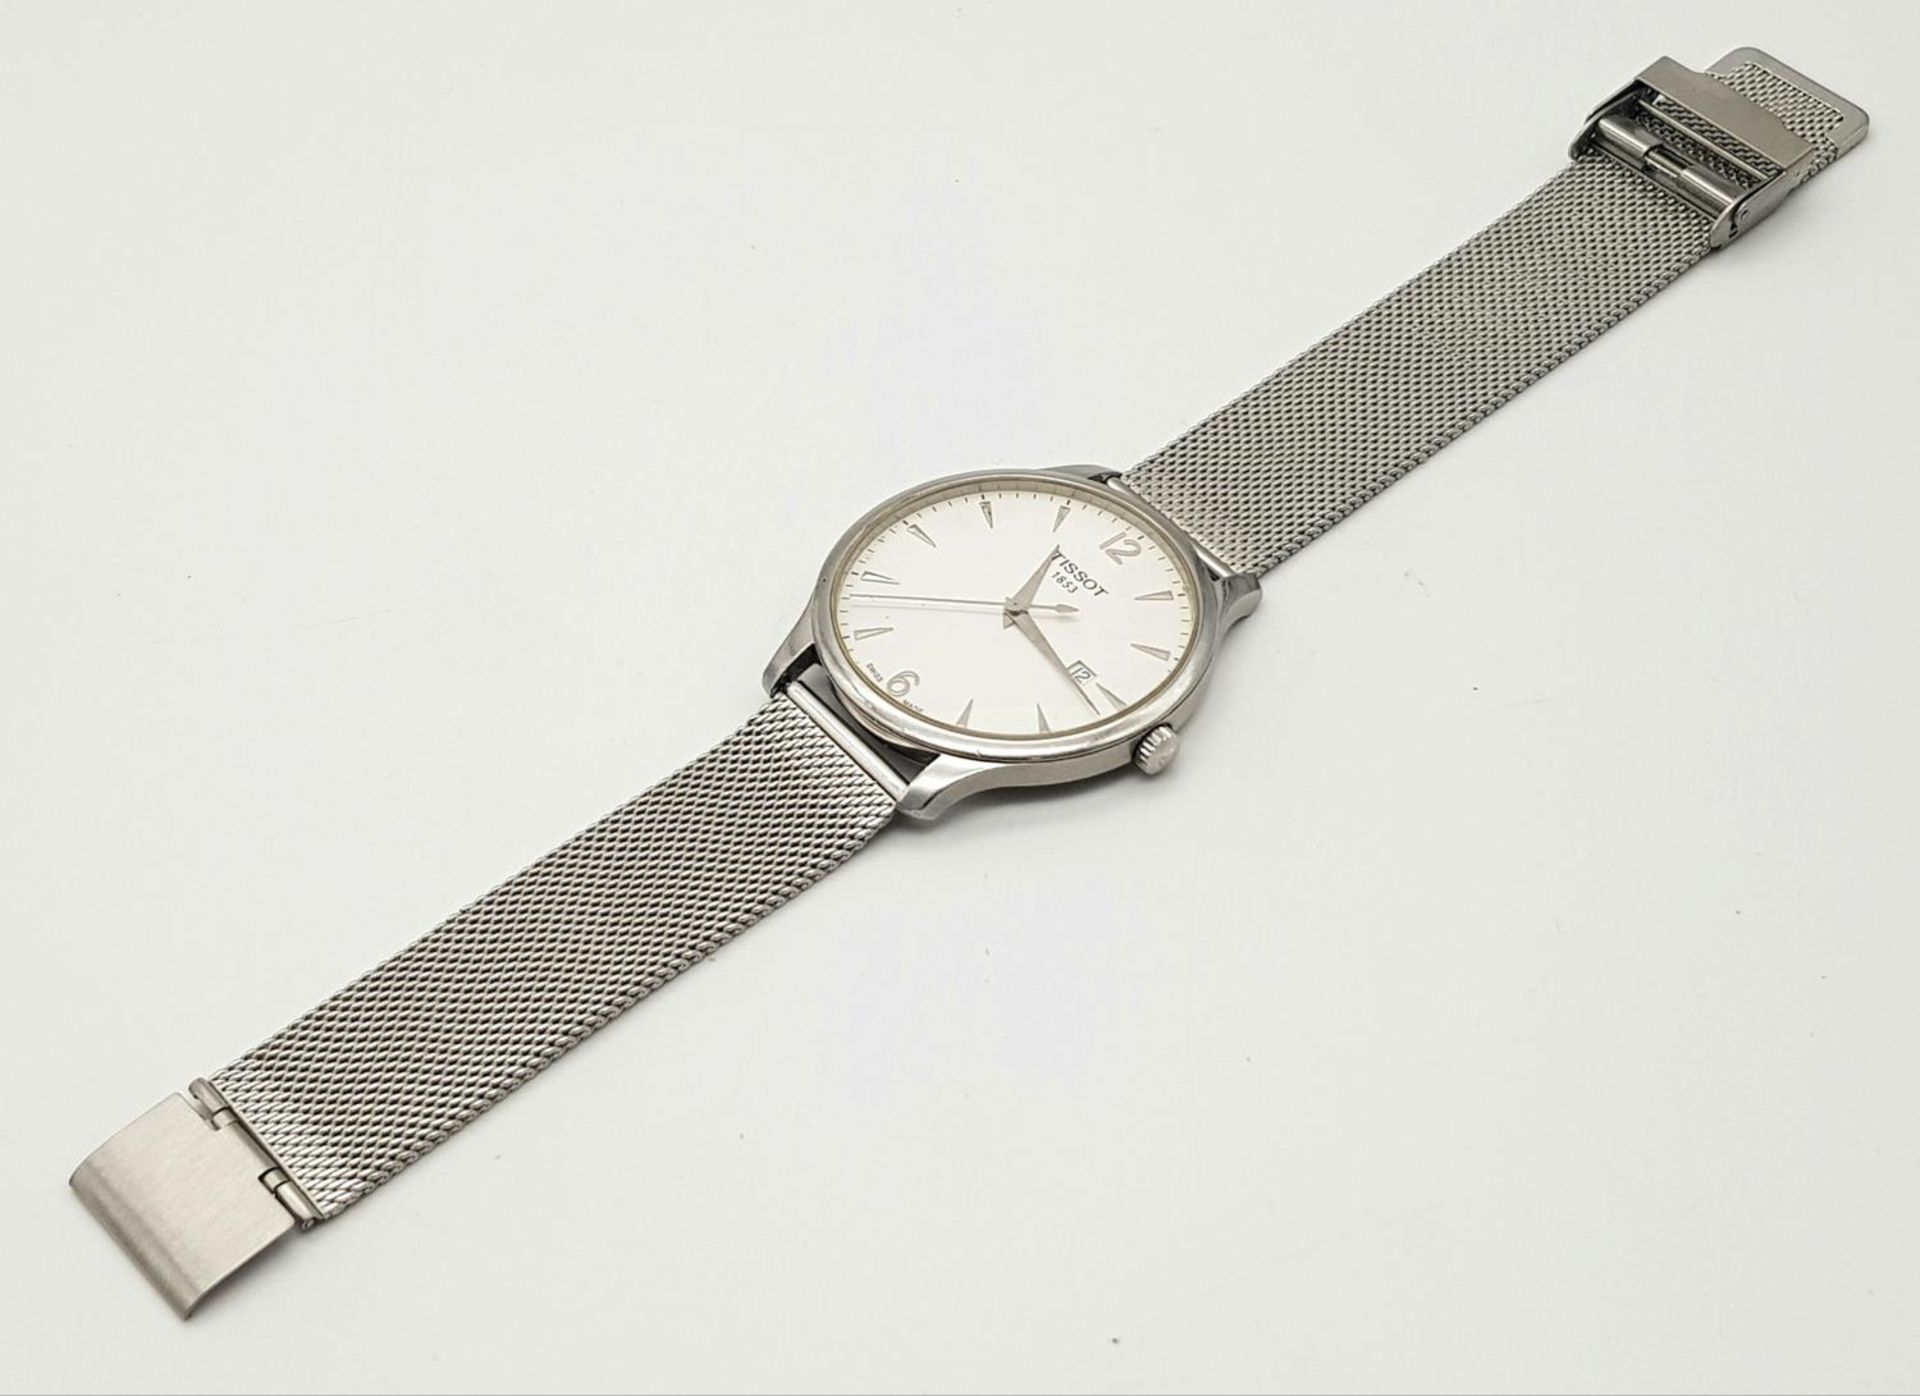 A Large Tissot Quartz Gents Watch. Stainless steel bracelet and case - 42mm. White dial with date - Bild 4 aus 6